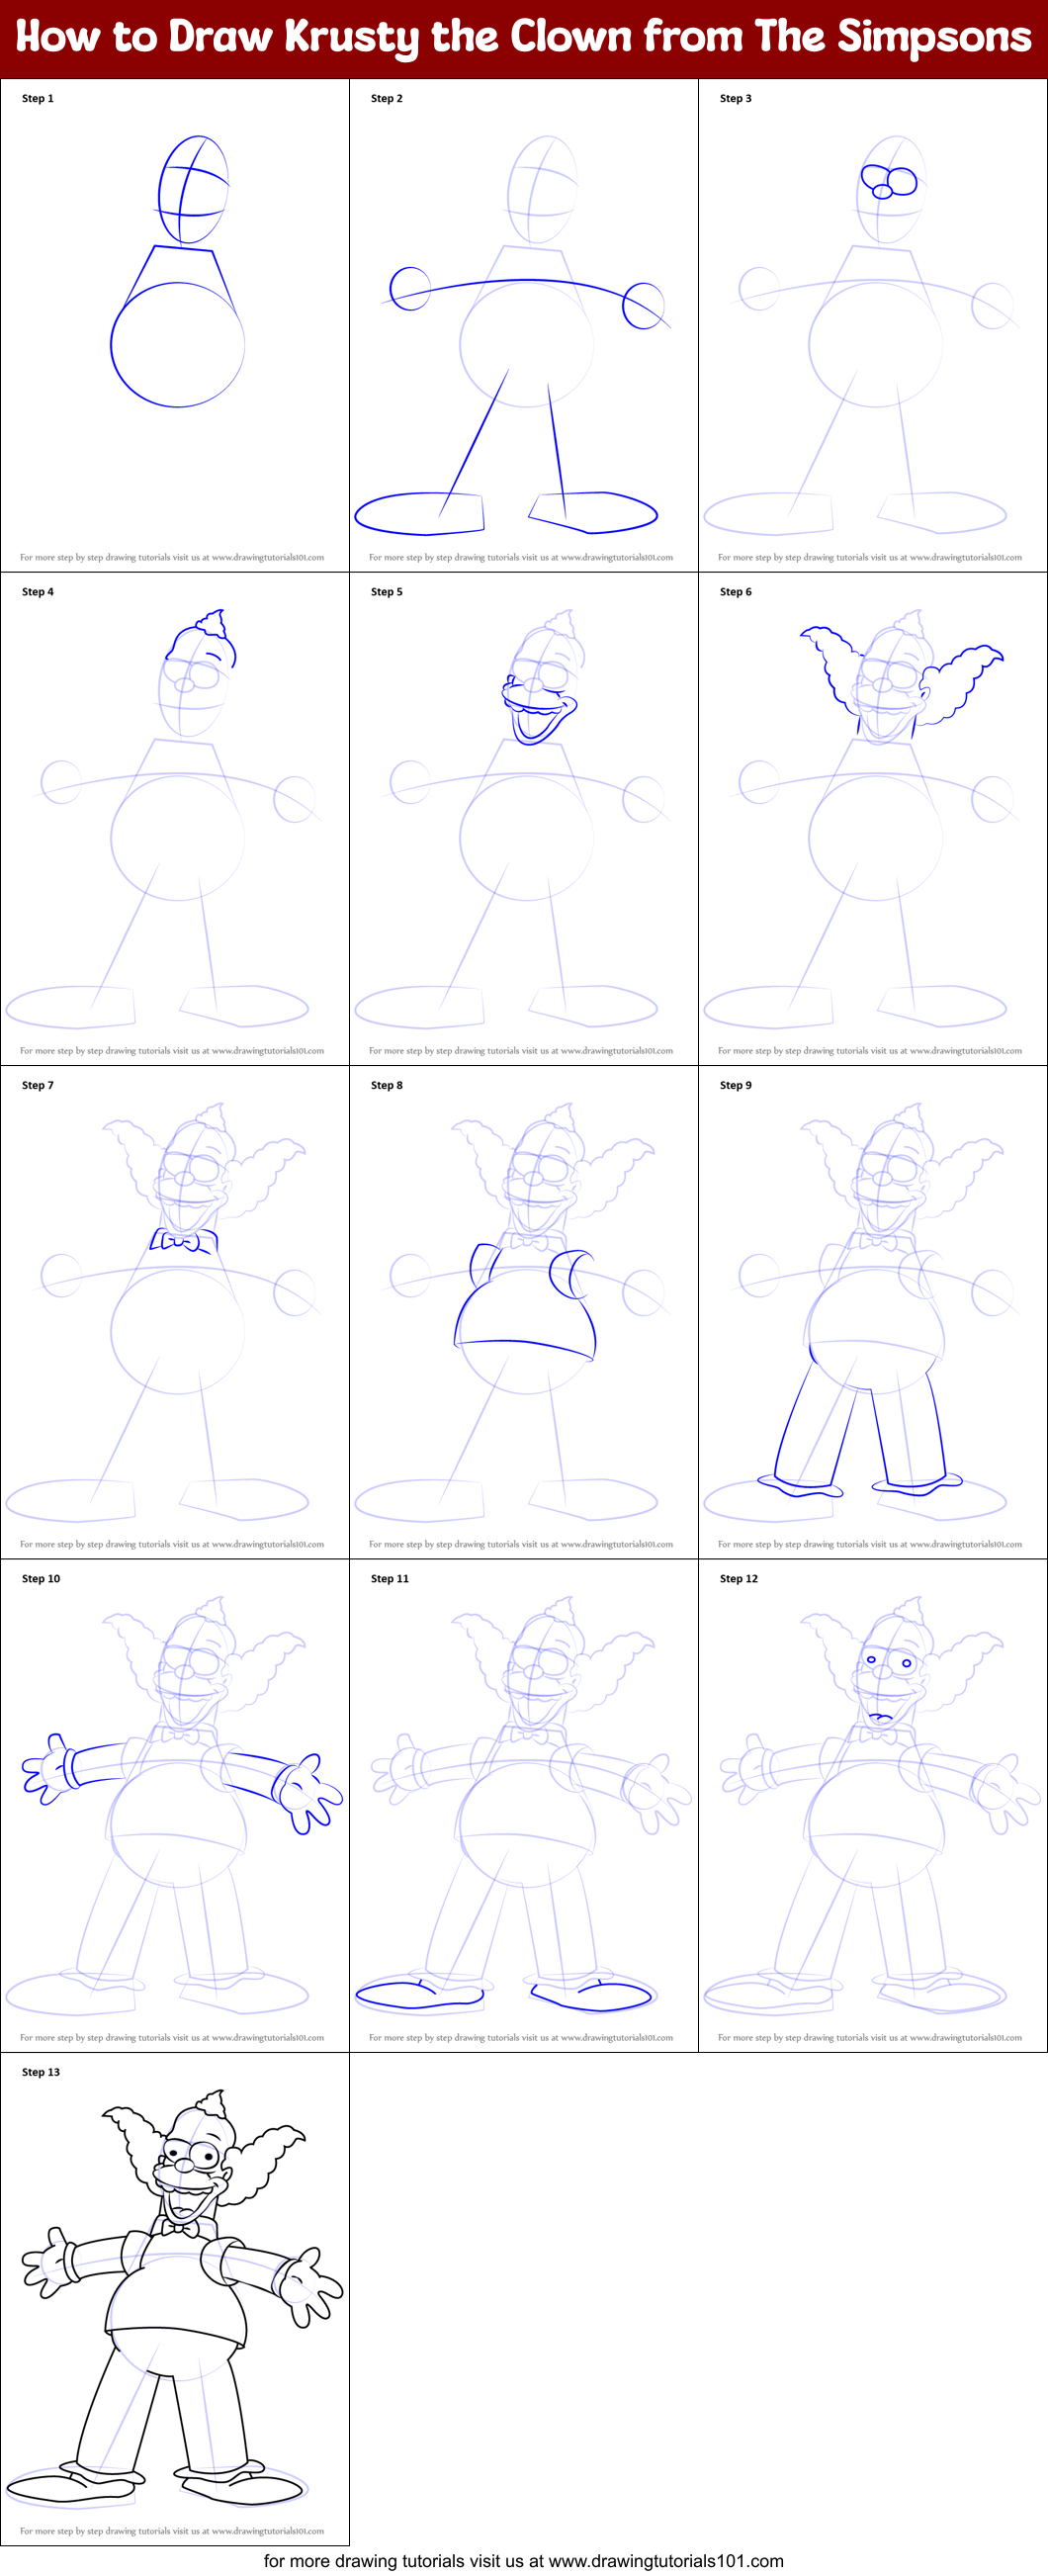 How to Draw Krusty the Clown from The Simpsons (The Simpsons) Step by ...